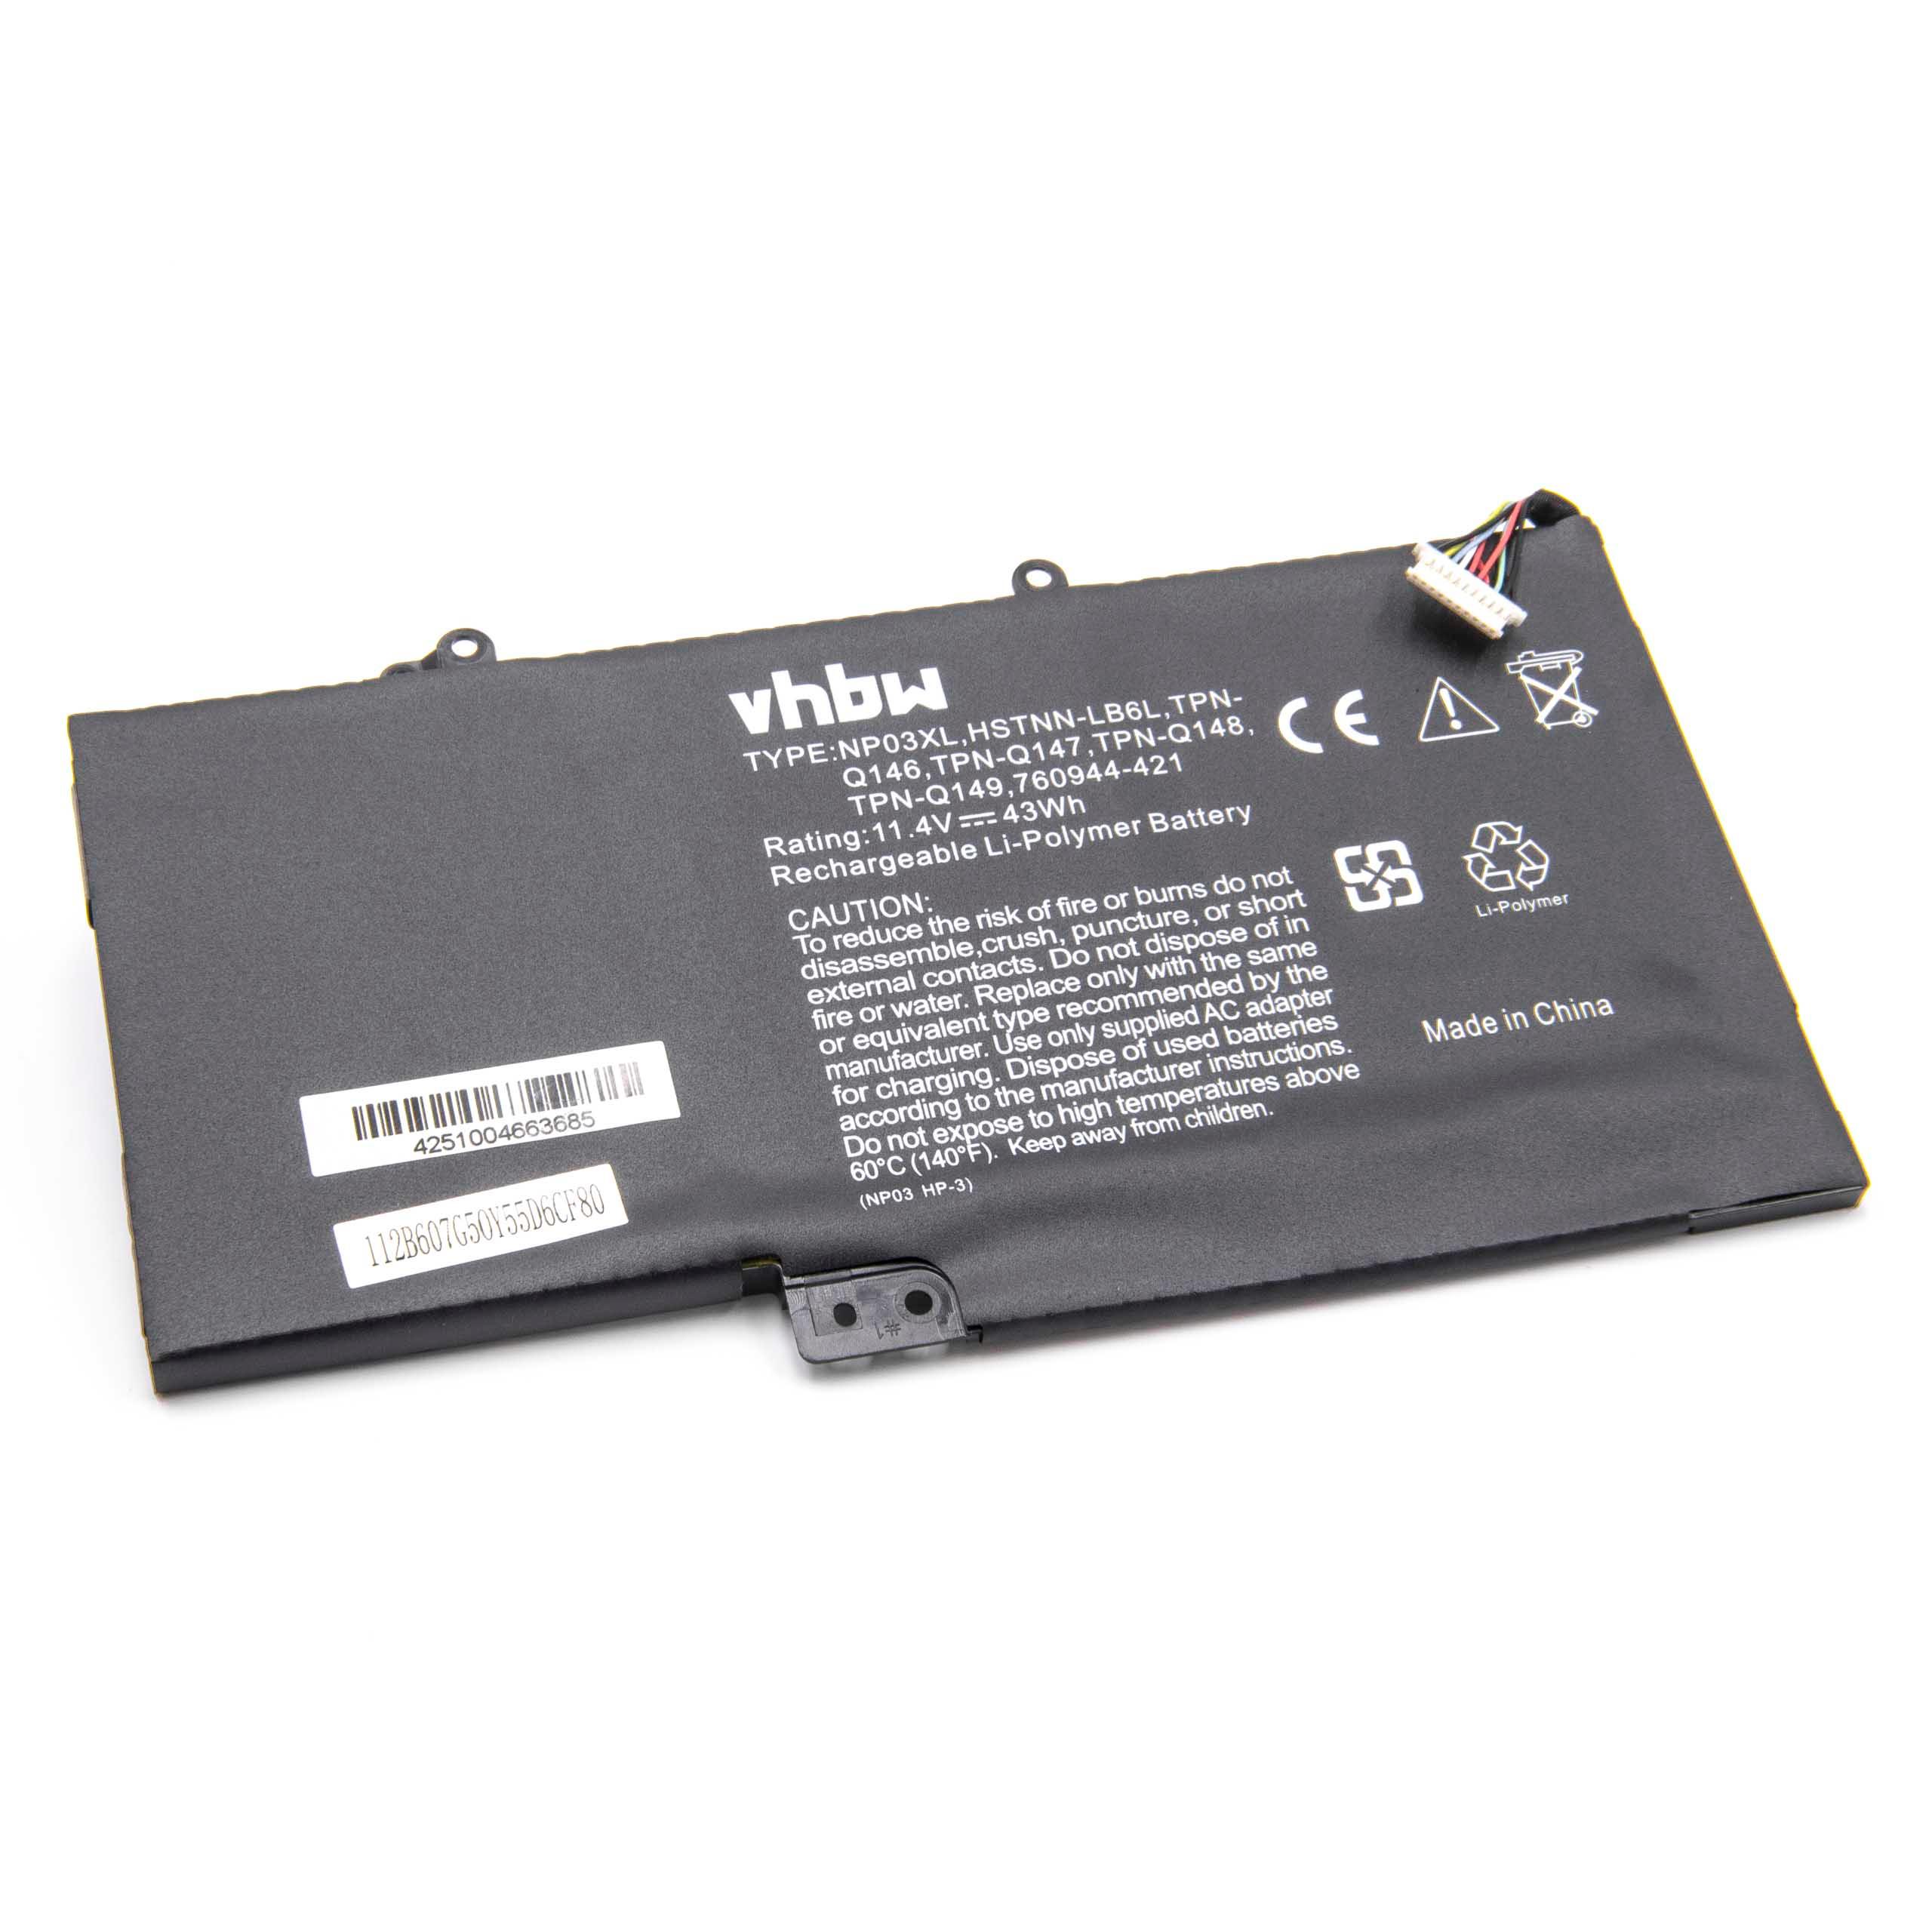 Notebook Battery Replacement for HP 761230-005, 767068-005, 760944-421, 760944-541 - 3750mAh 11.1V Li-polymer